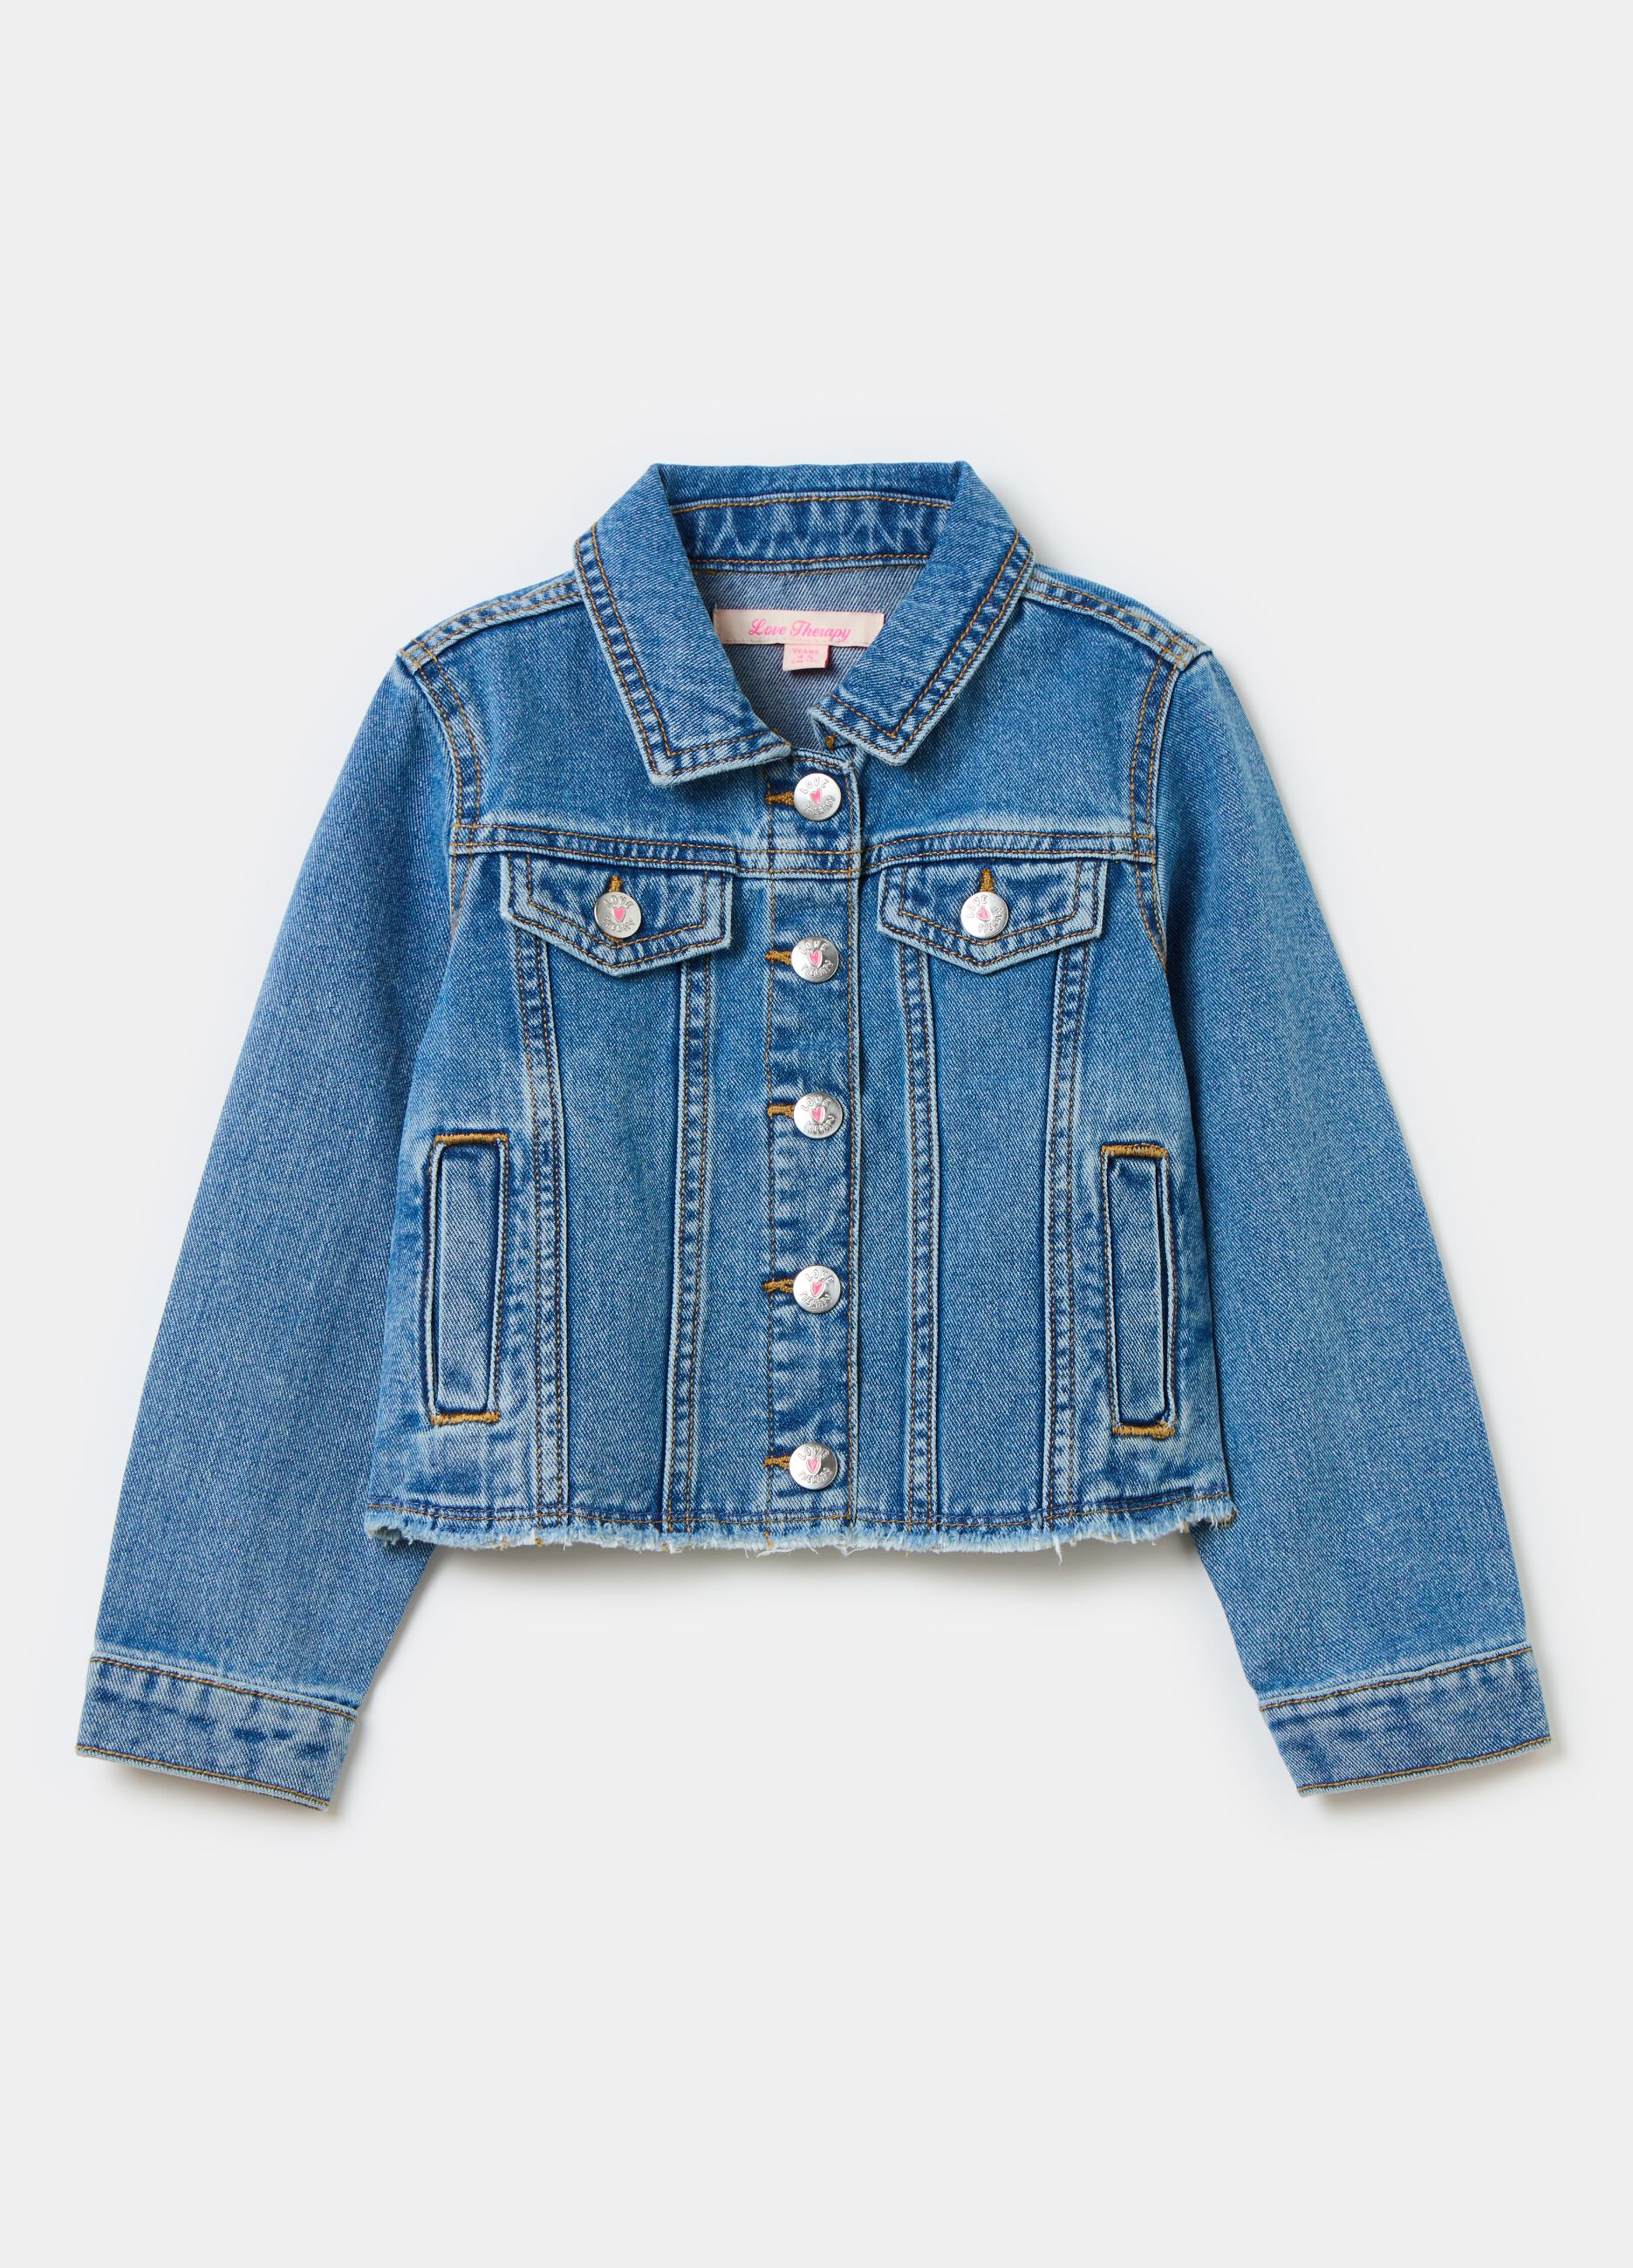 Denim jacket with heart patch